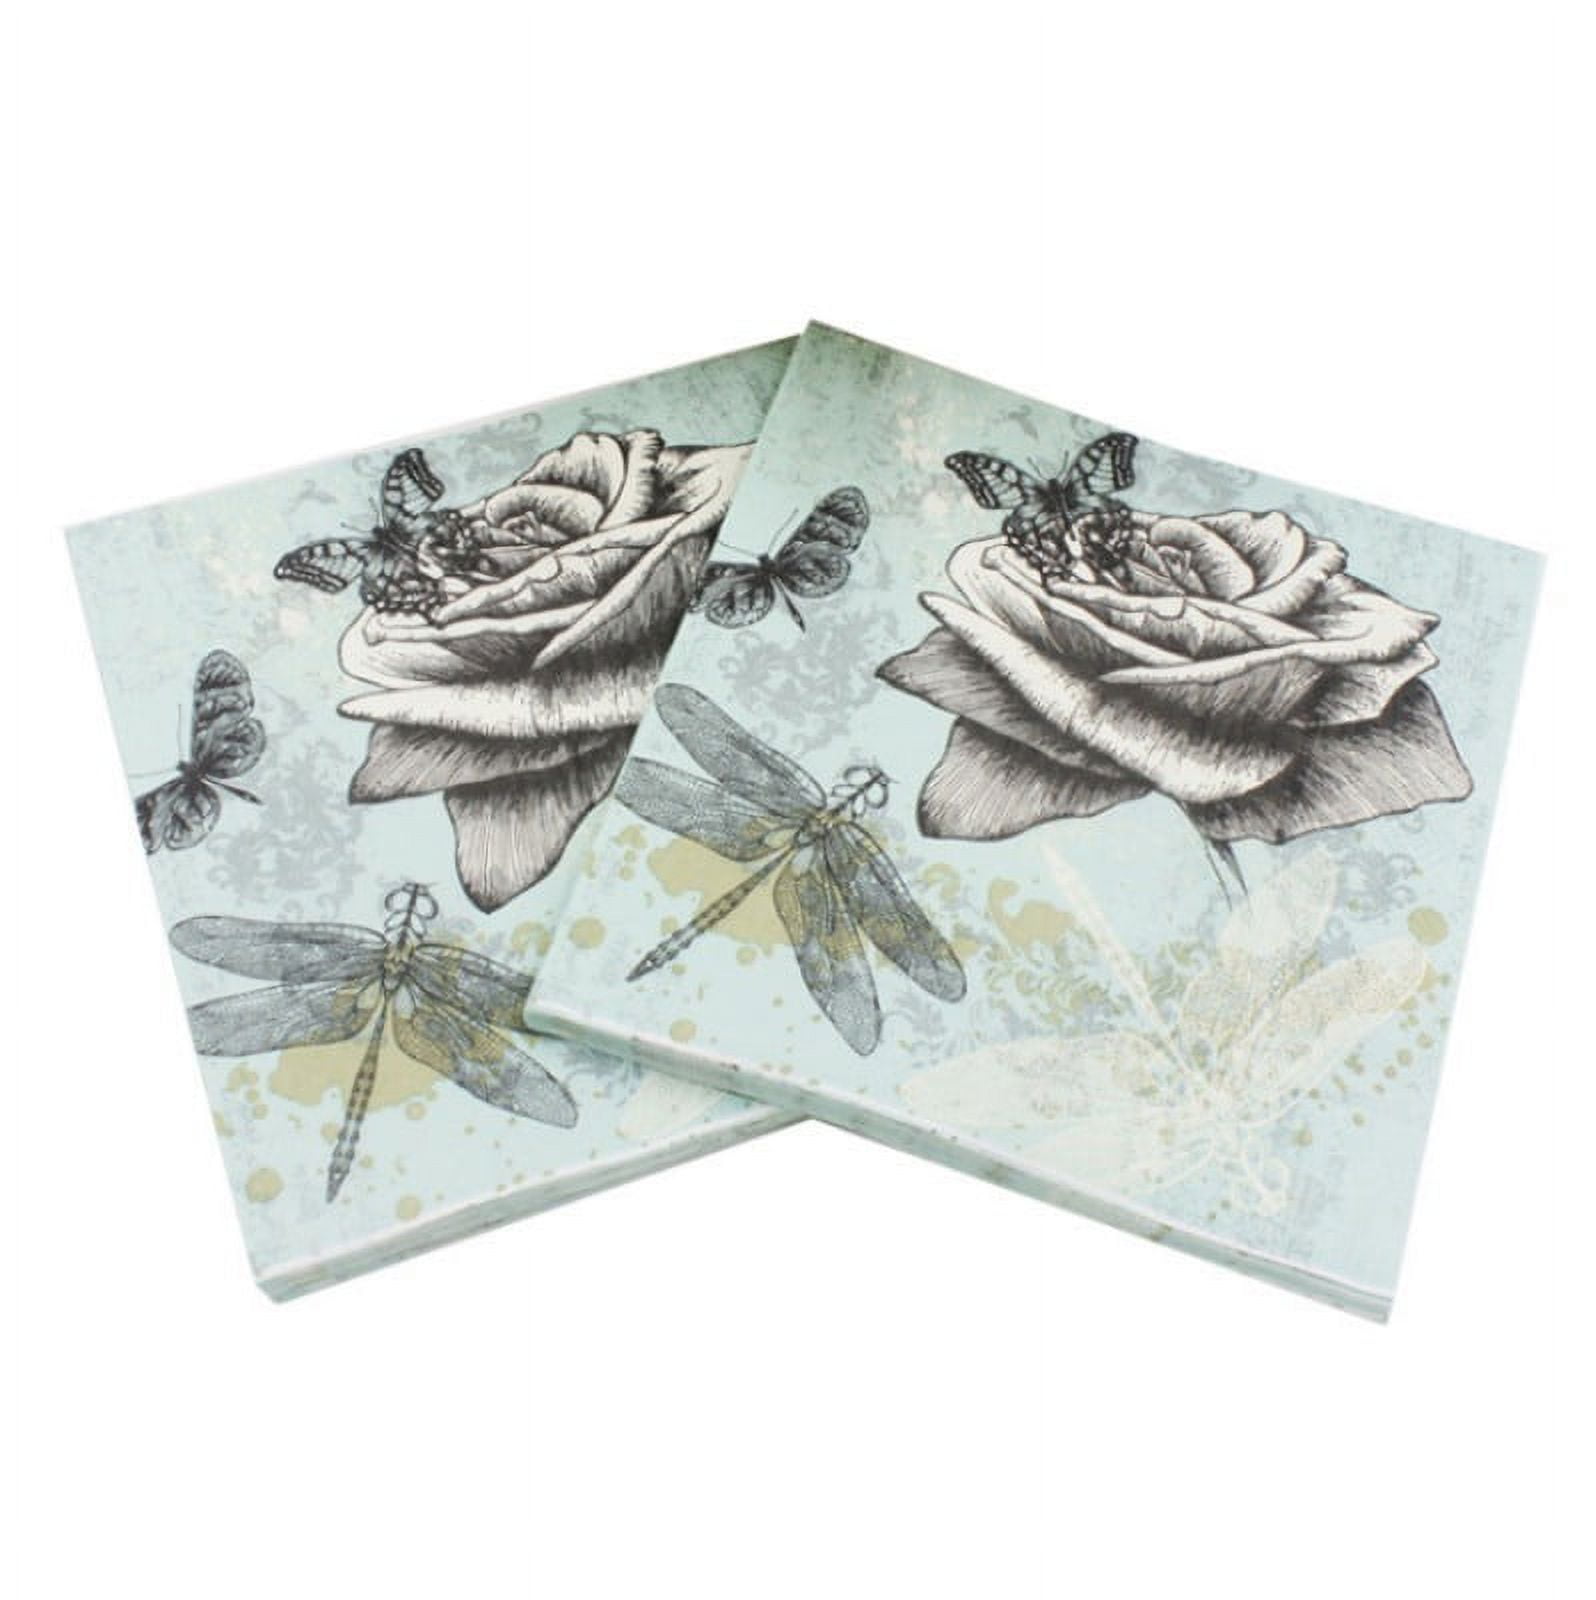 ALINK Decoupage Paper Napkins with Vintage Floral Pattern, Printting Peony Birds Decorative Dinner Tea Party Shower, 20 Count